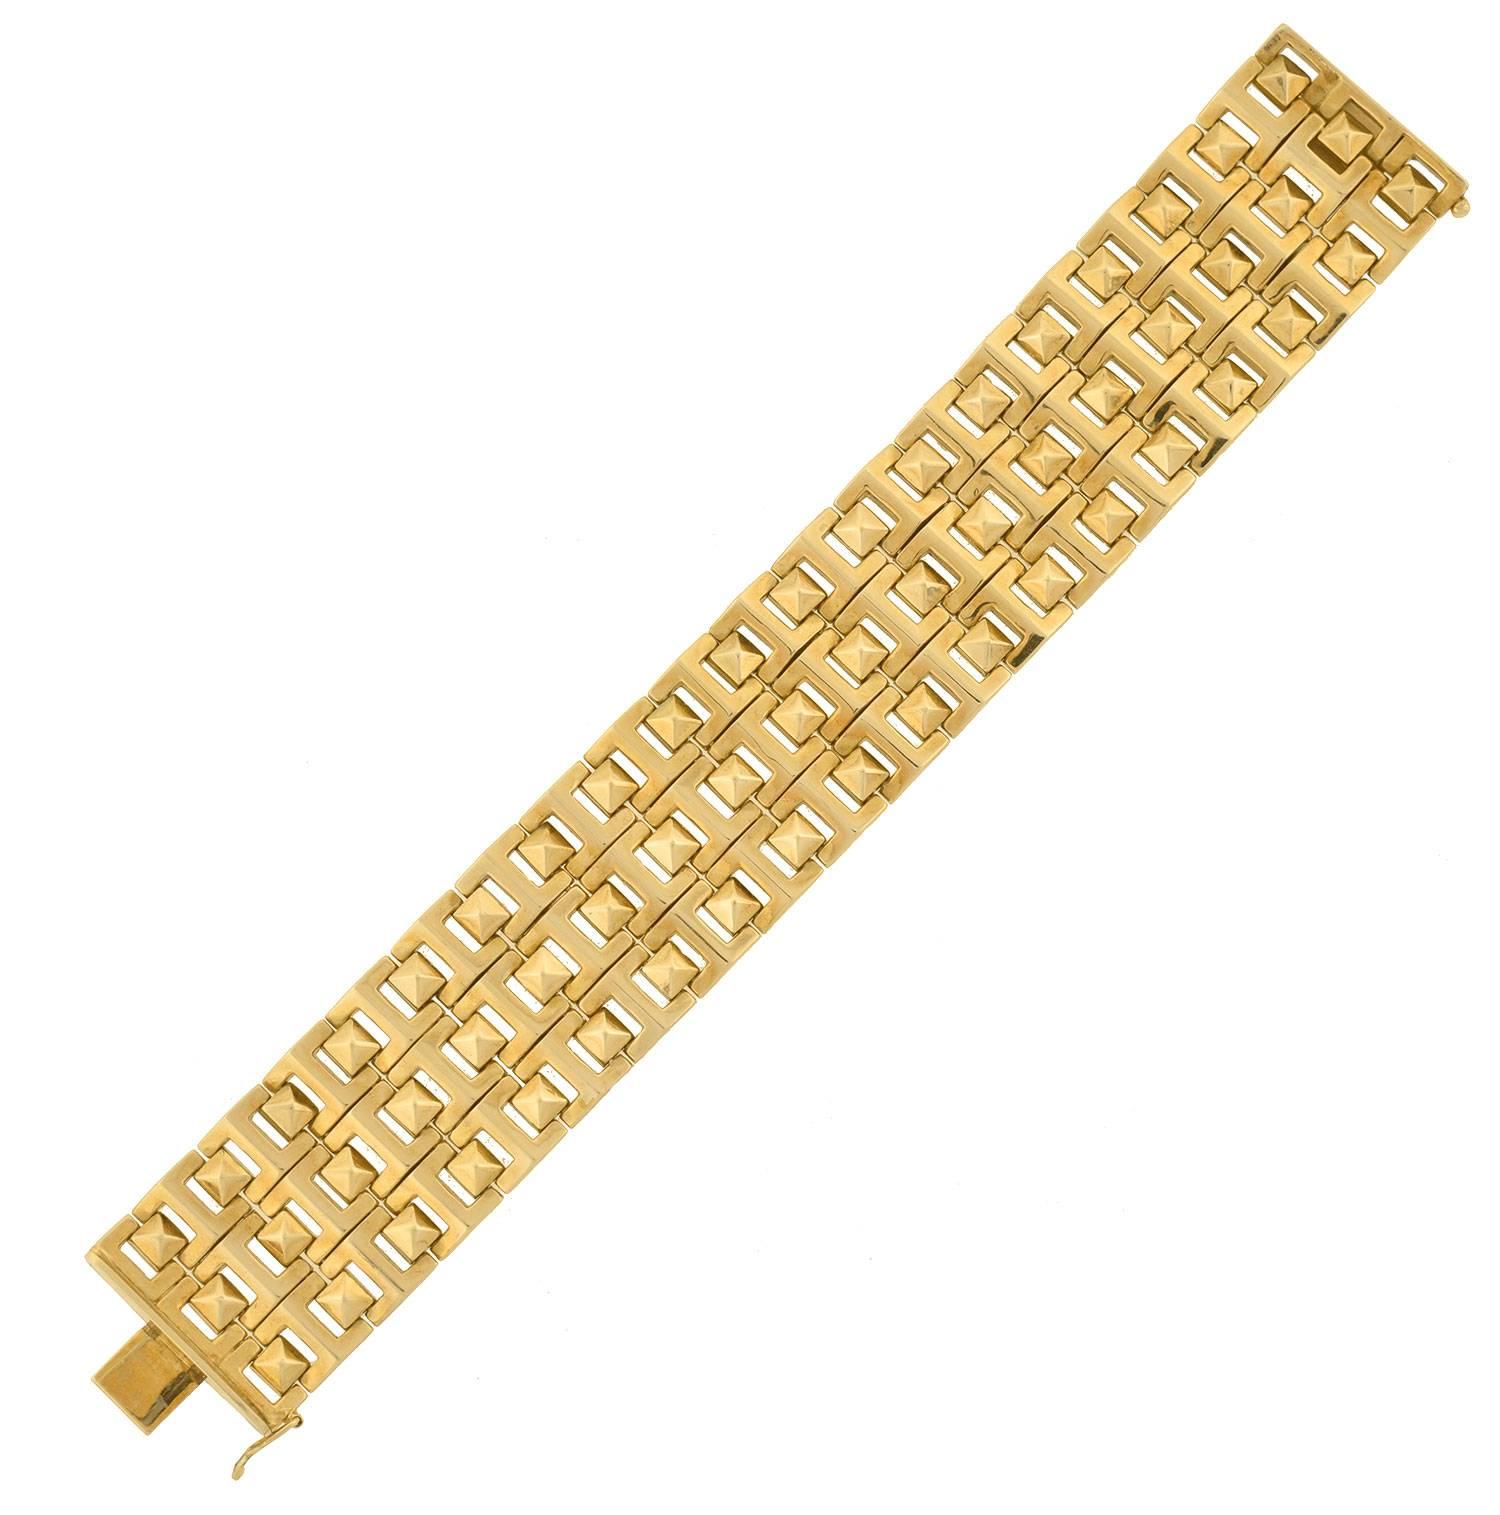 This fabulous estate bracelet makes a very stylish, modern statement piece! Crafted in 14kt yellow gold, it has a substantial appearance formed by rows of hinged links. A pattern of pyramid-shaped studs rest in between open squares, giving a